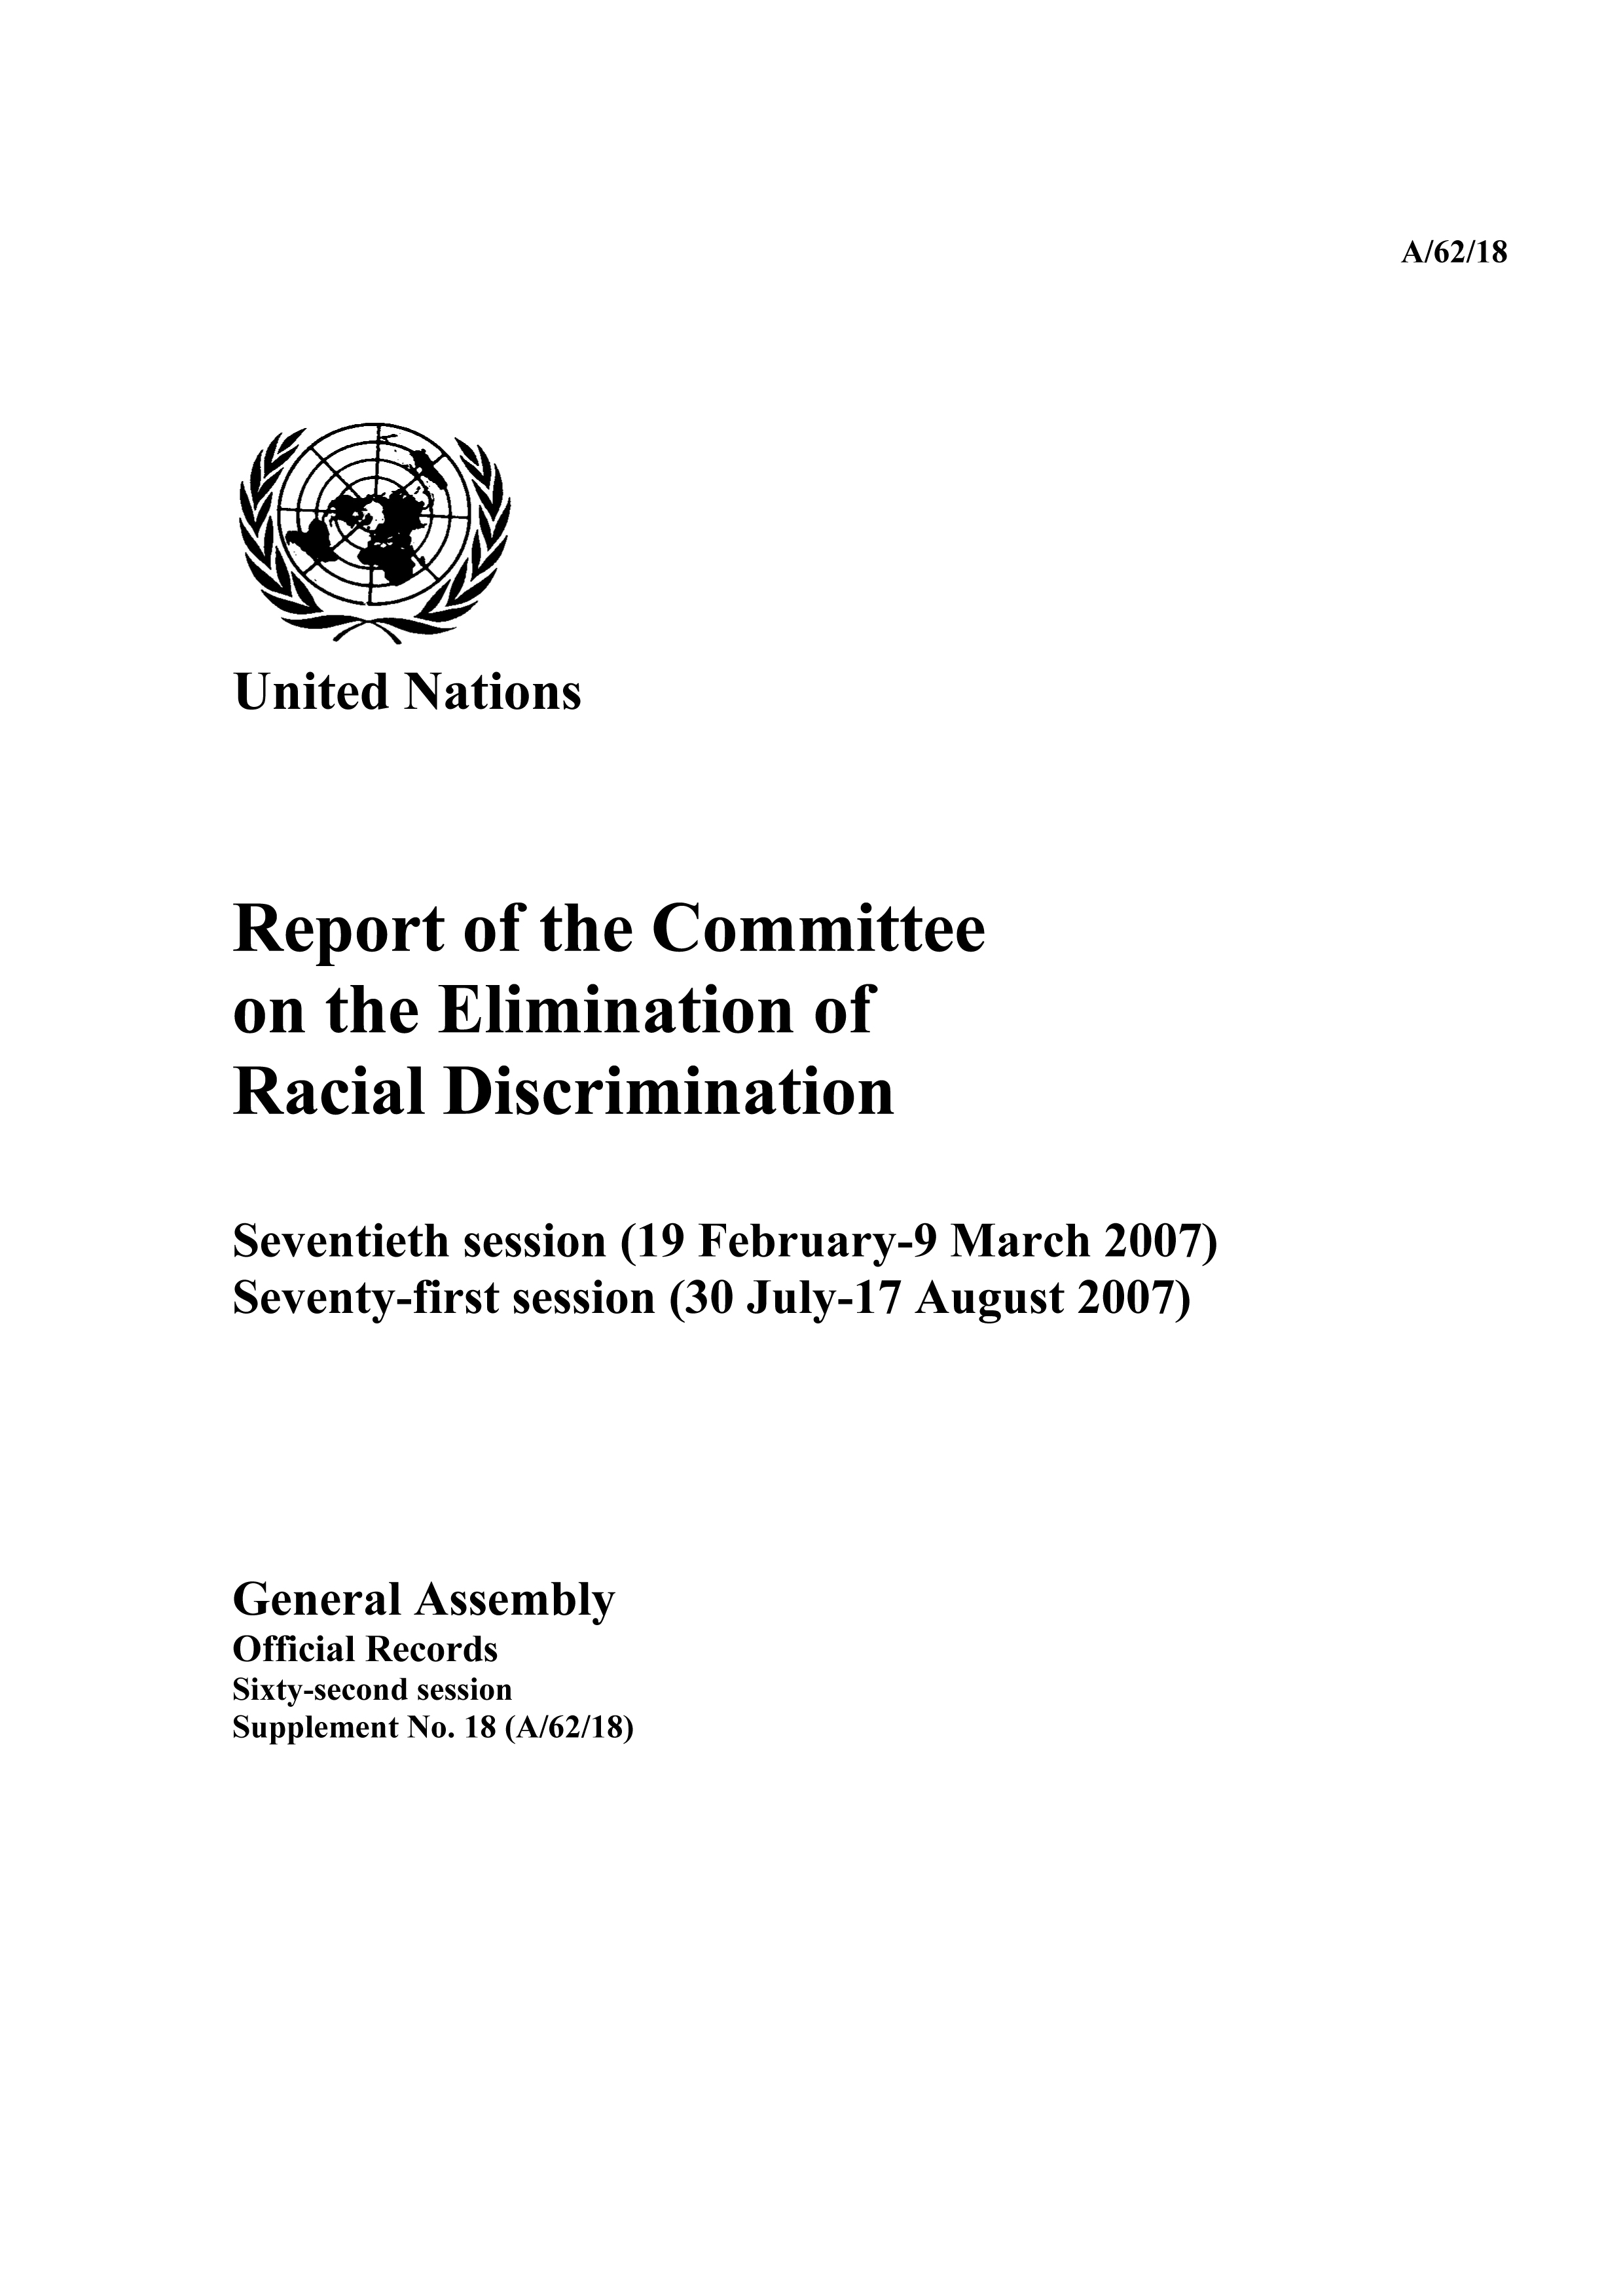 image of Follow-up to the World Conference against Racism, Racial Discrimination, Xenophobia and Related Intolerance